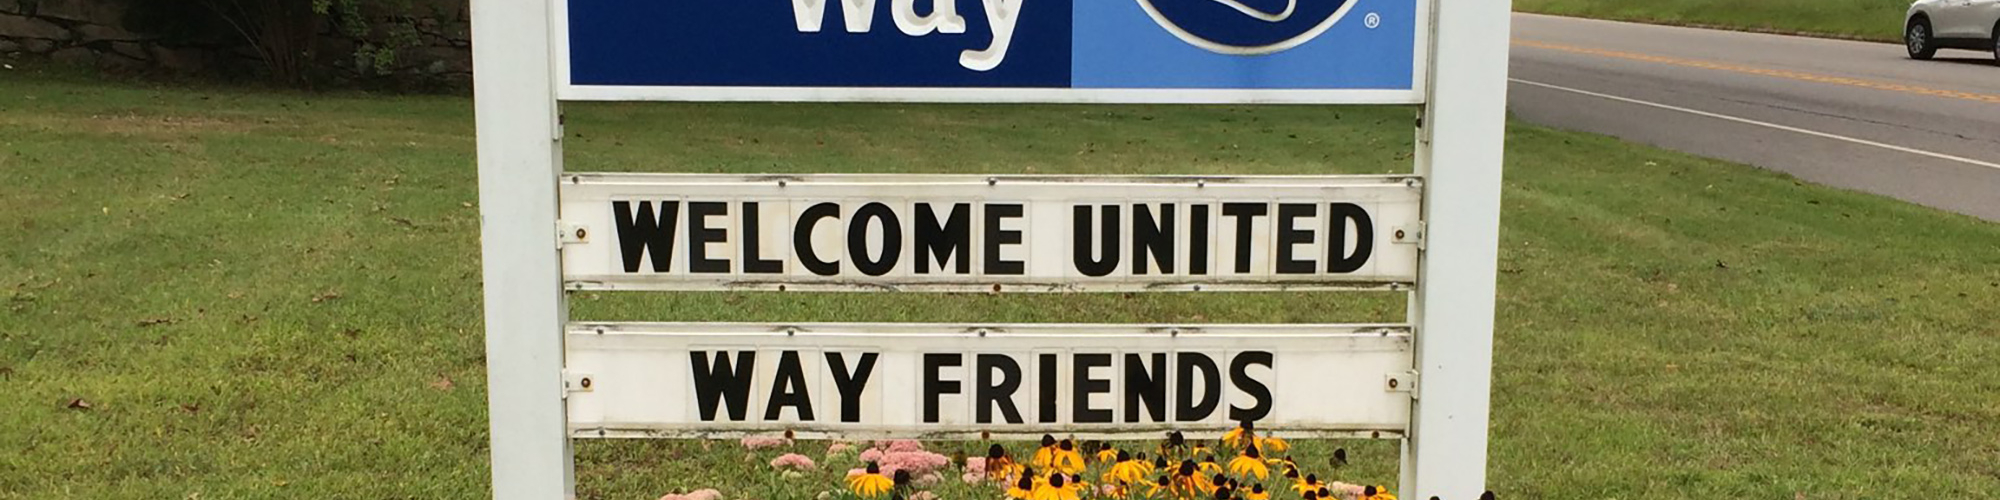 Welcome United Way Friends